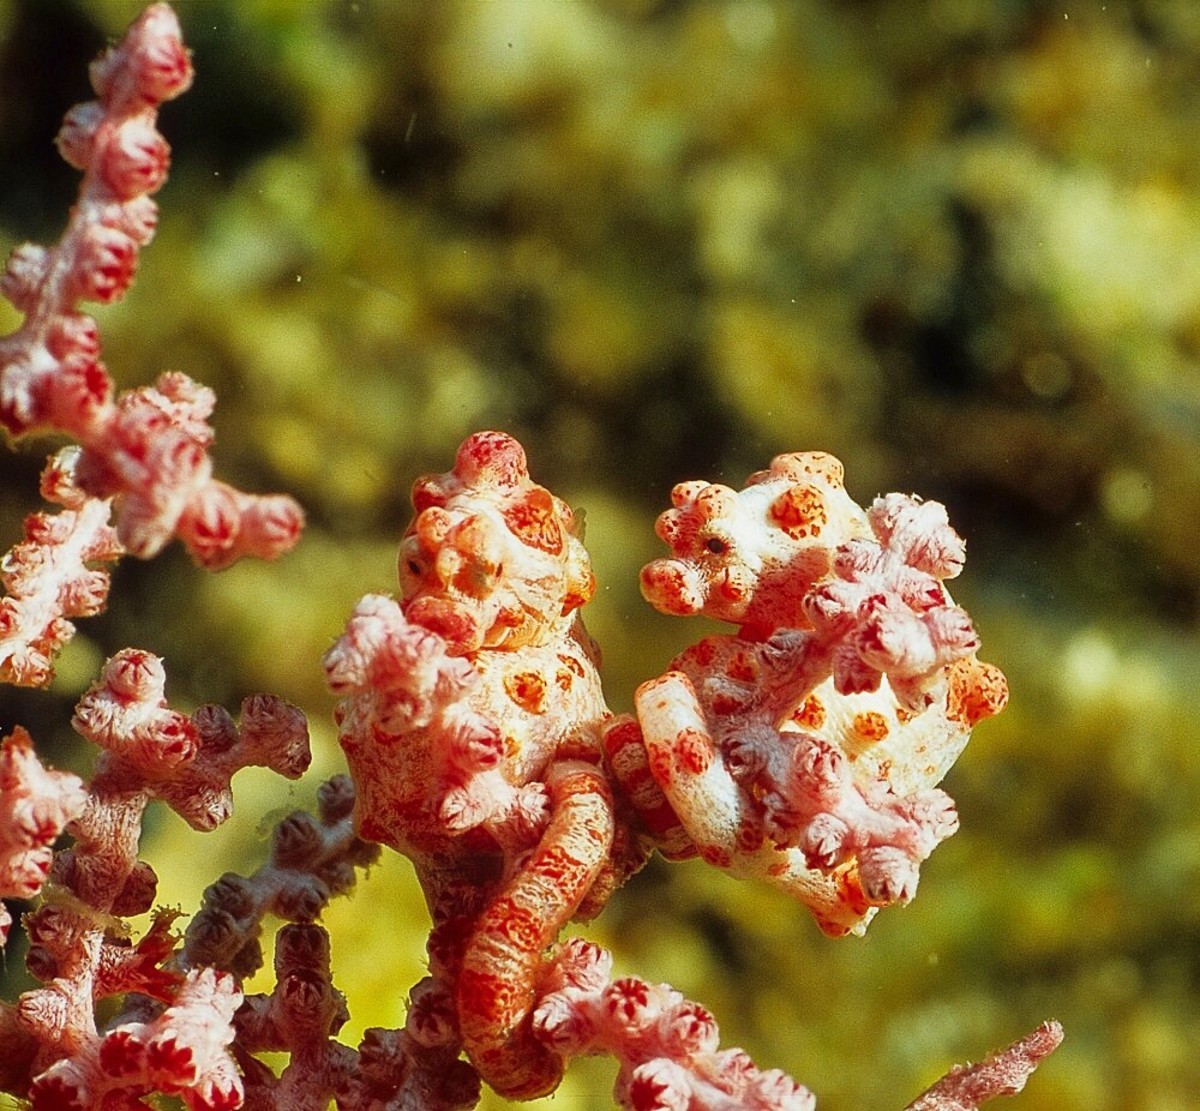 There are two Bargibant's seahorses in this photo, though they may be hard to see.